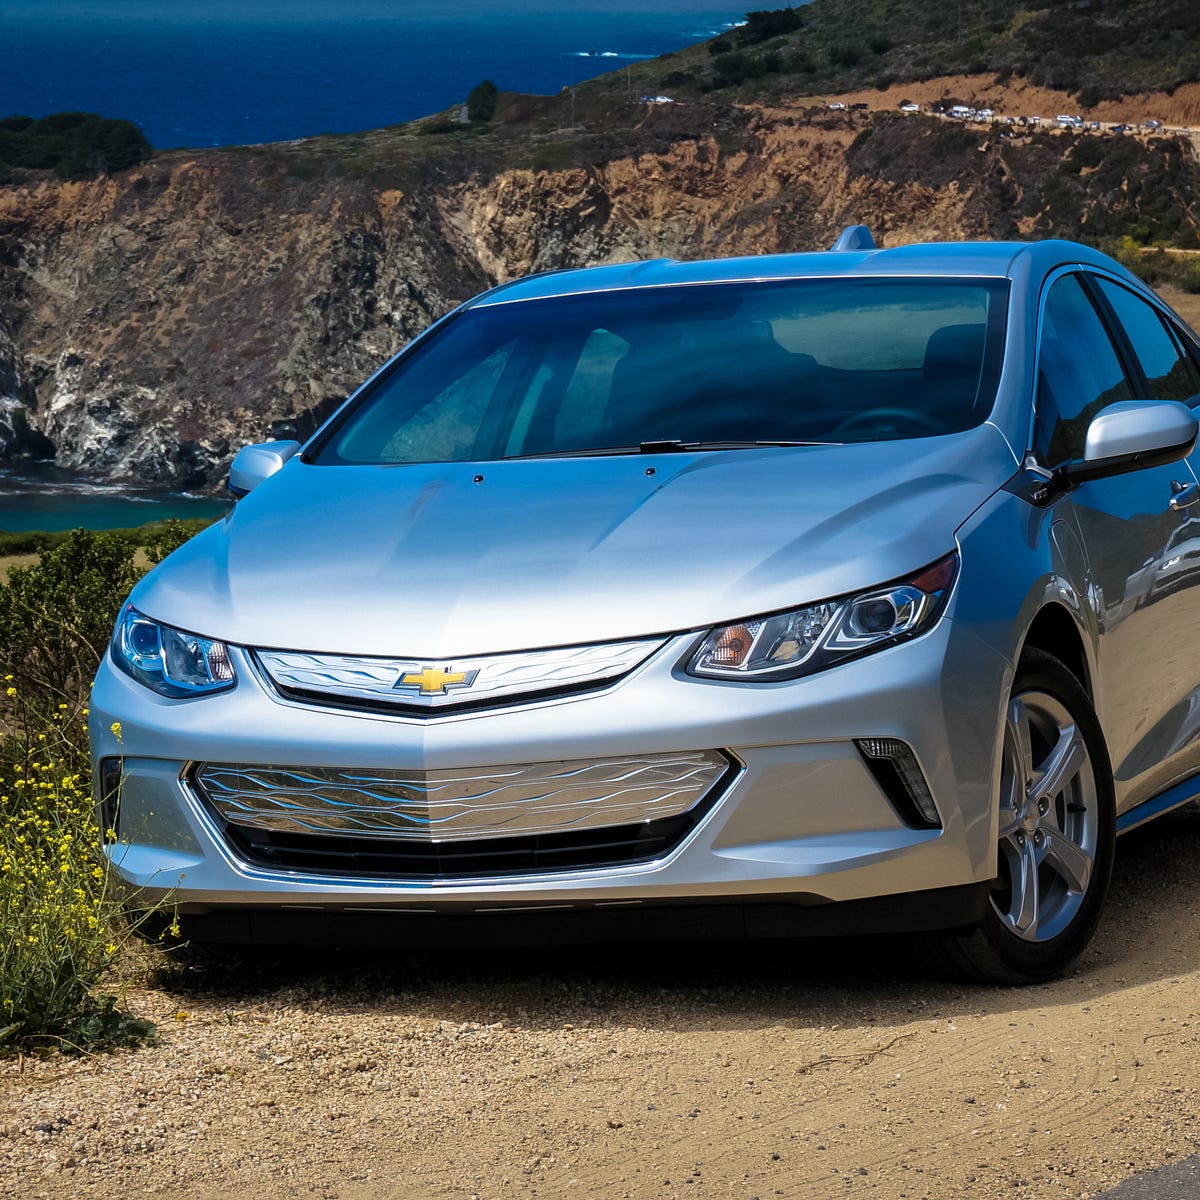 2016 Chevrolet Volt review: 2016 Chevrolet Volt: Your mileage may vary, but  it's way better than before - CNET